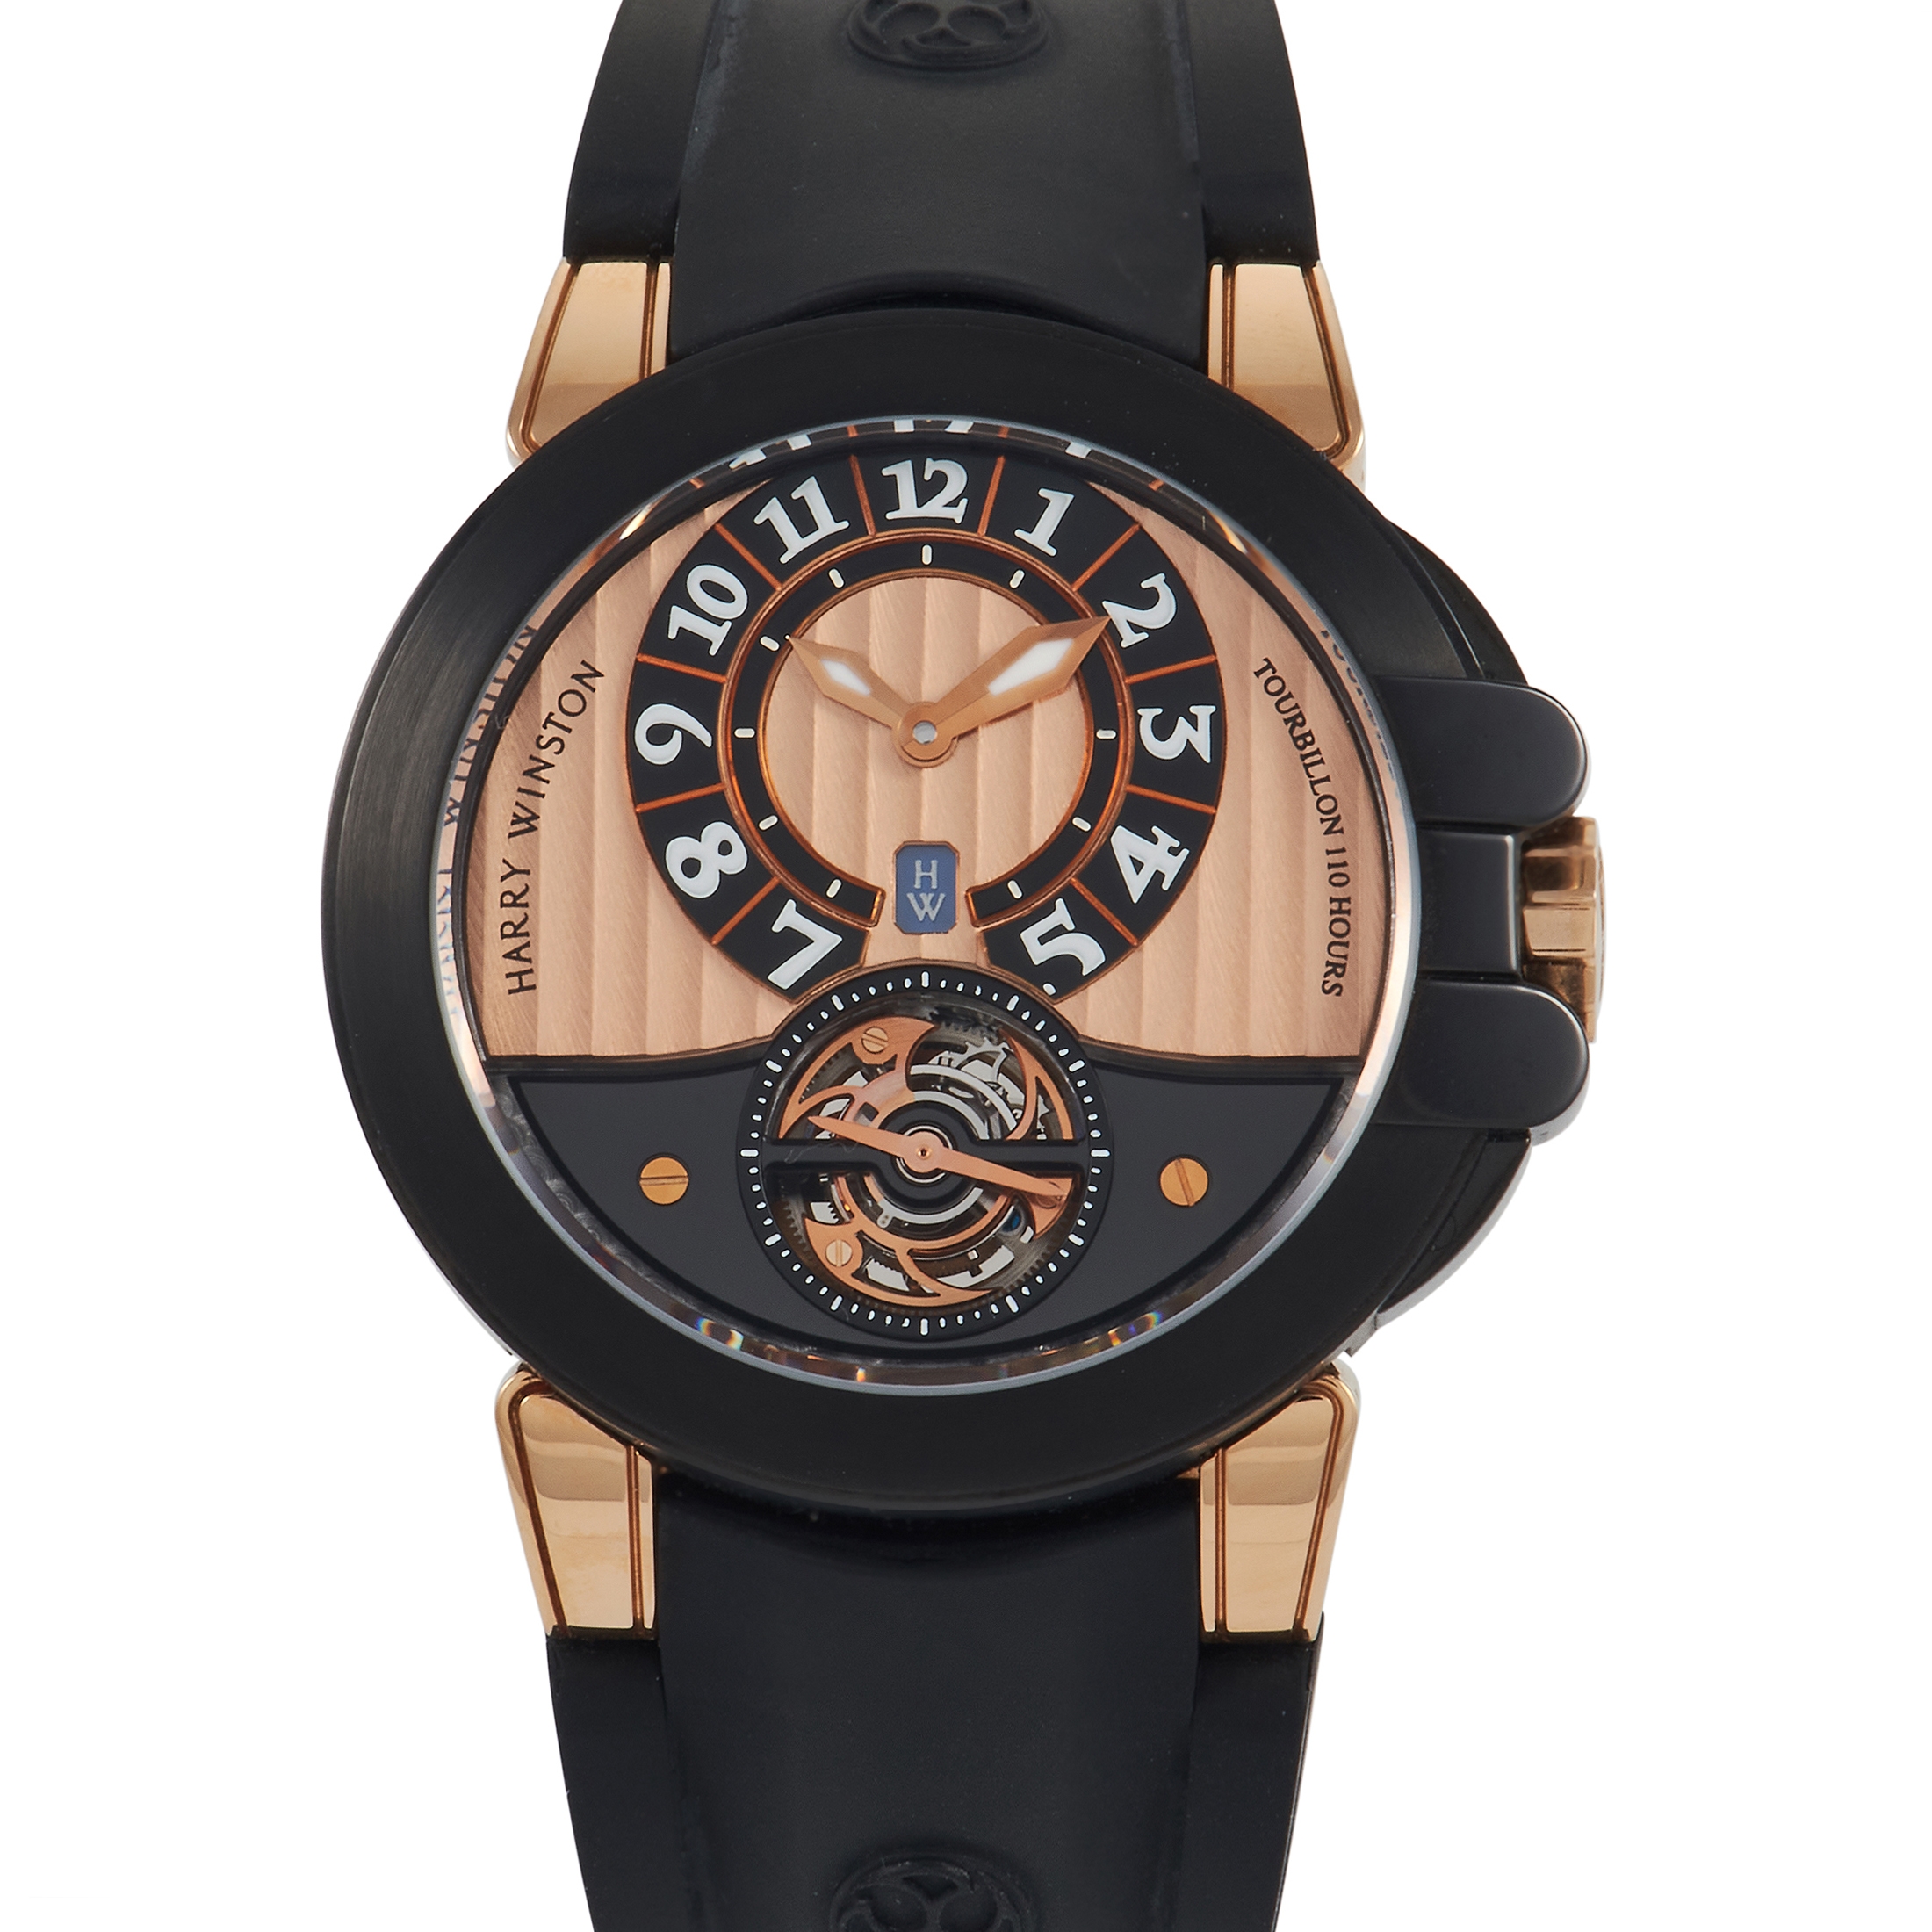 7 Extraordinary New Watches to Gift This Holiday Season - Galerie